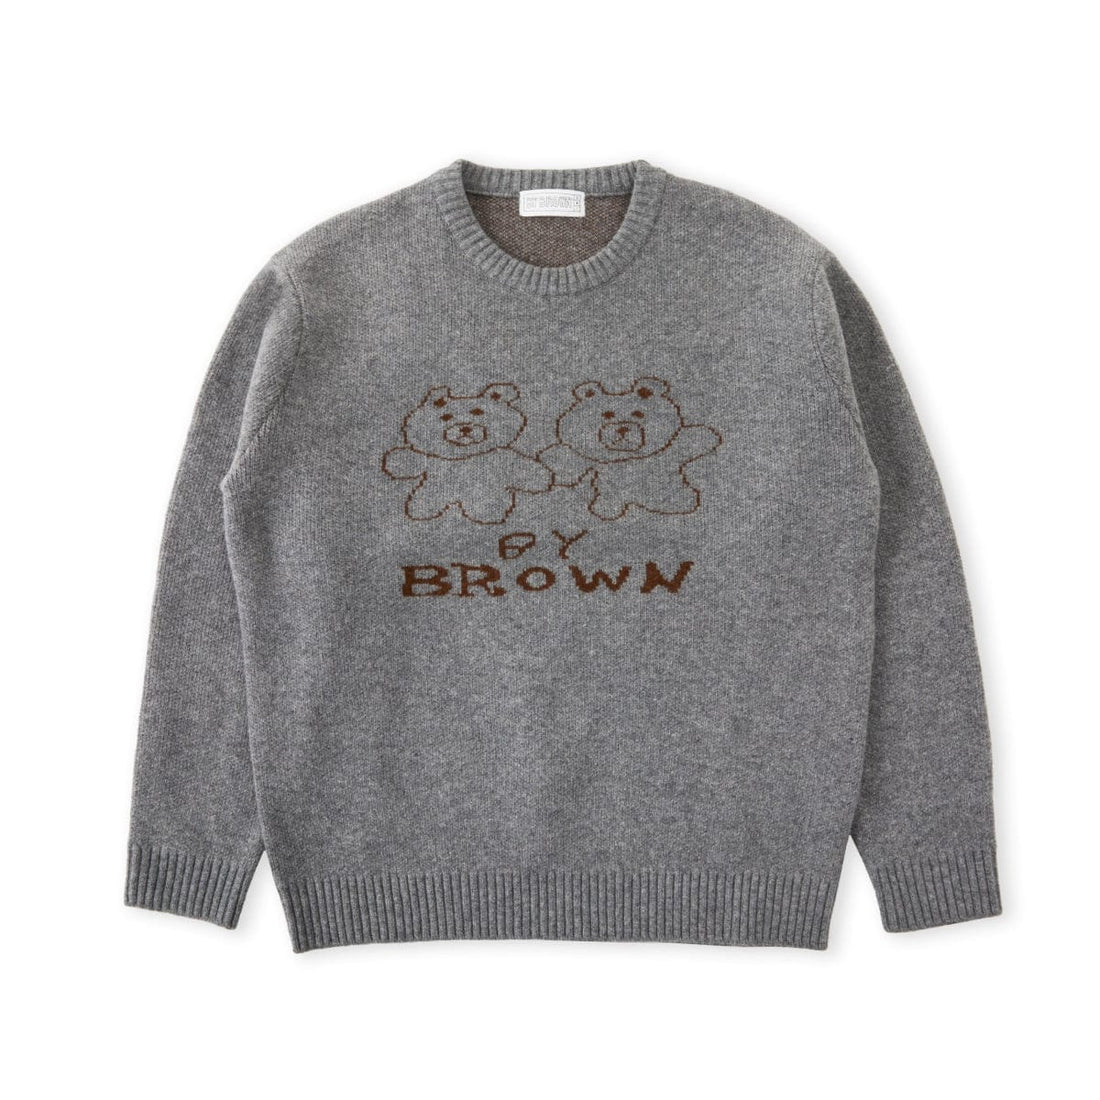 LINE FRIENDS FASHION LINE FRIENDS by BROWN GRAY KNIT PULLOVER